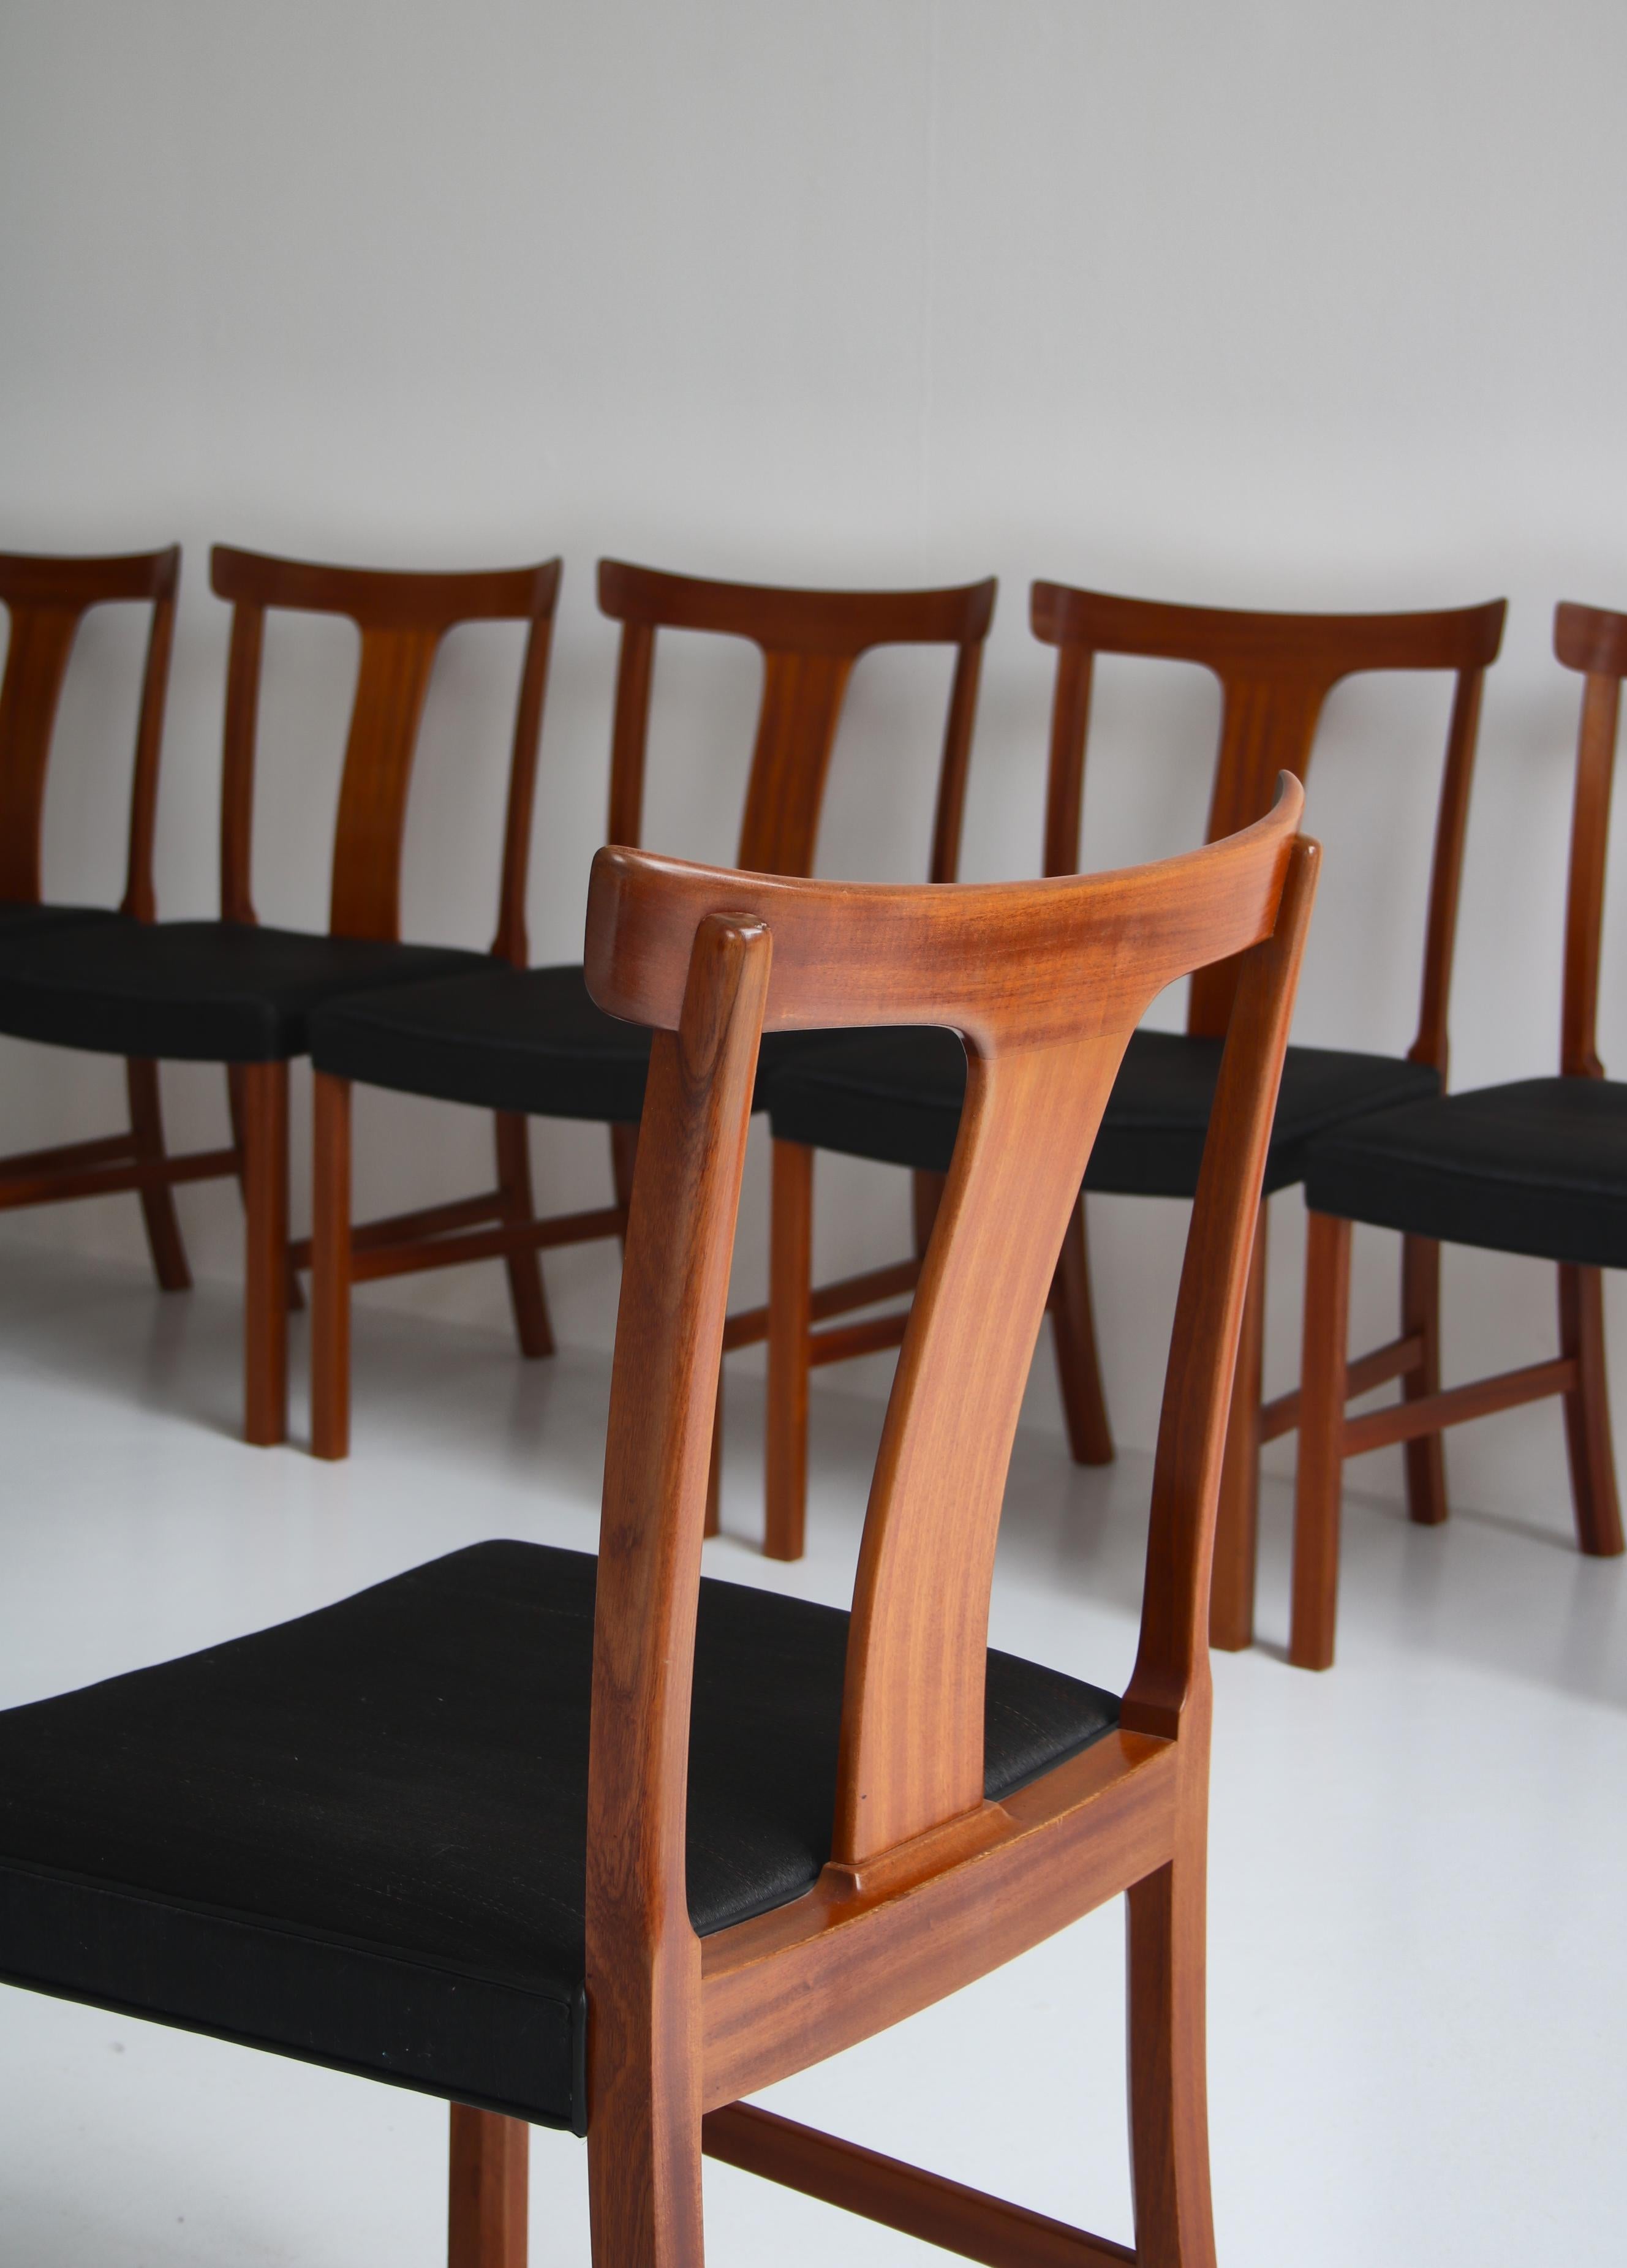 Ole Wanscher Dining Chairs in Mahogany and Horsehair Made by A.J. Iversen, 1960s For Sale 1